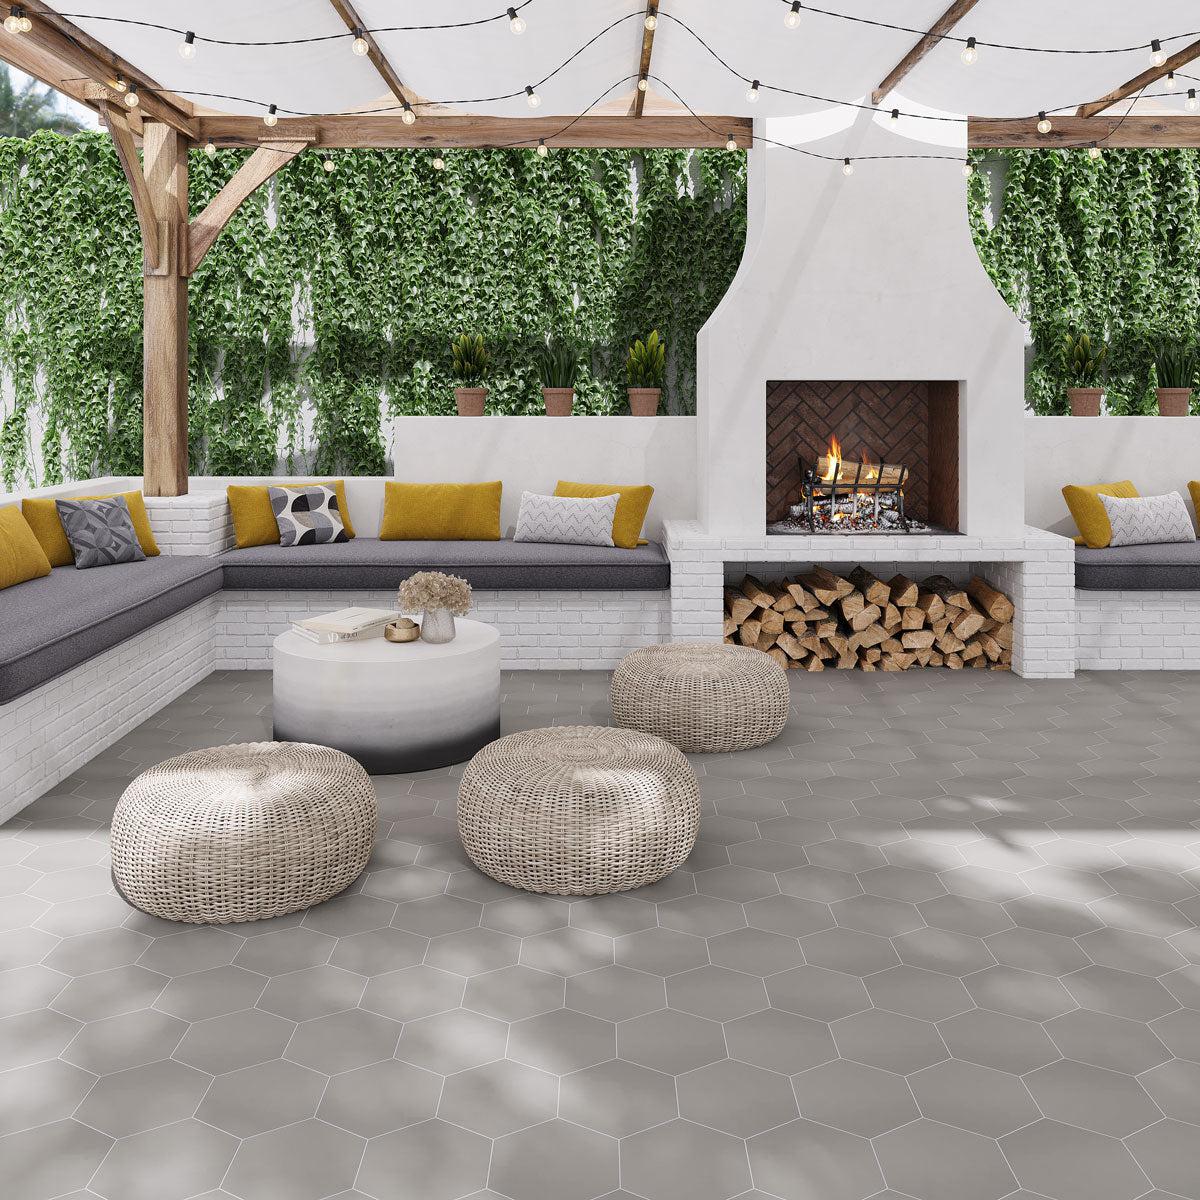 Outdoor seating area and fireplace with Magic Silver Porcelain Hexagon floor tiles